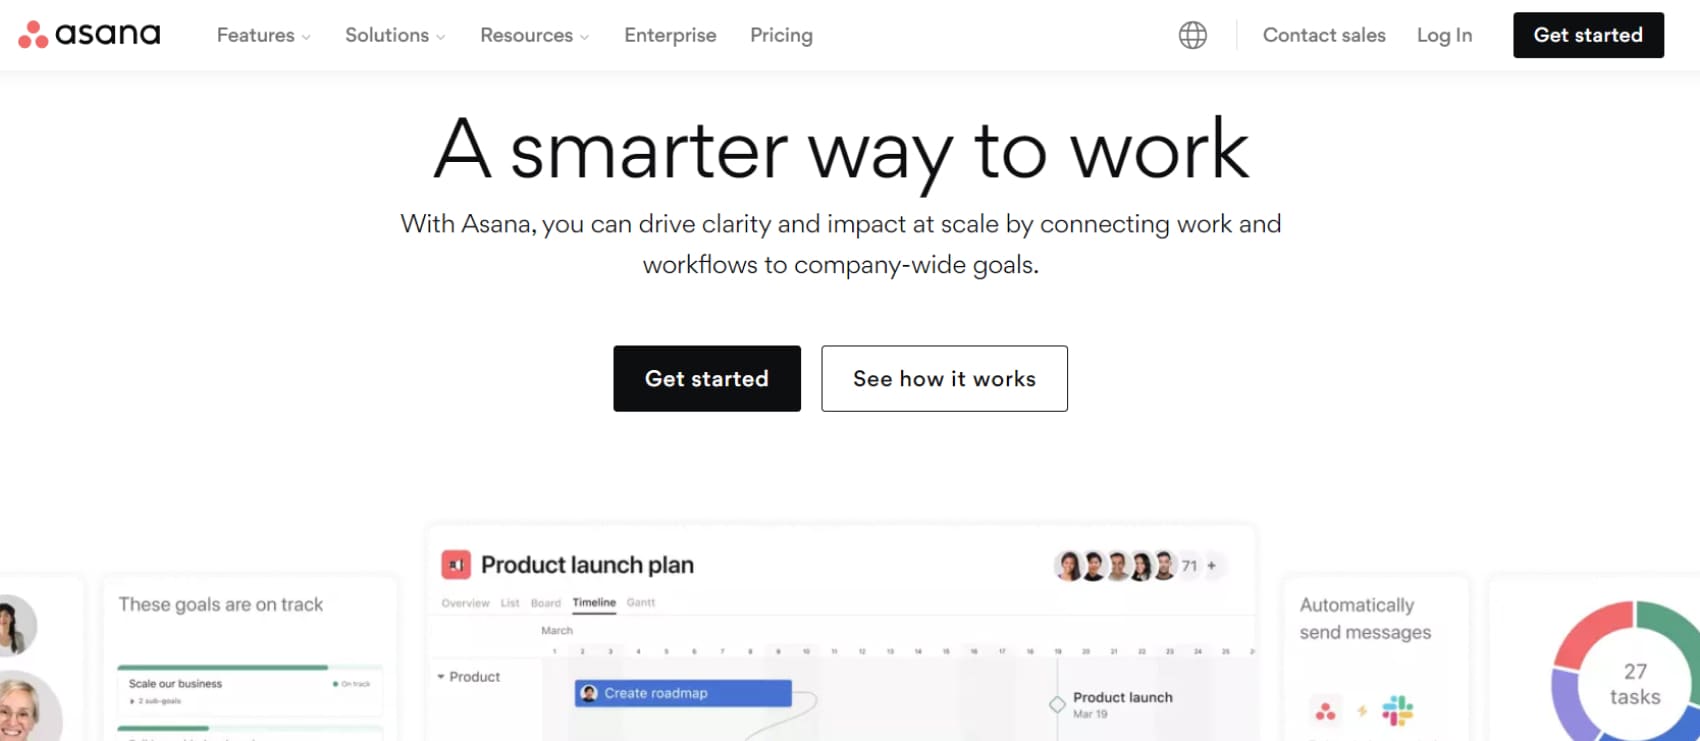 Asana is a tool for inbound marketing